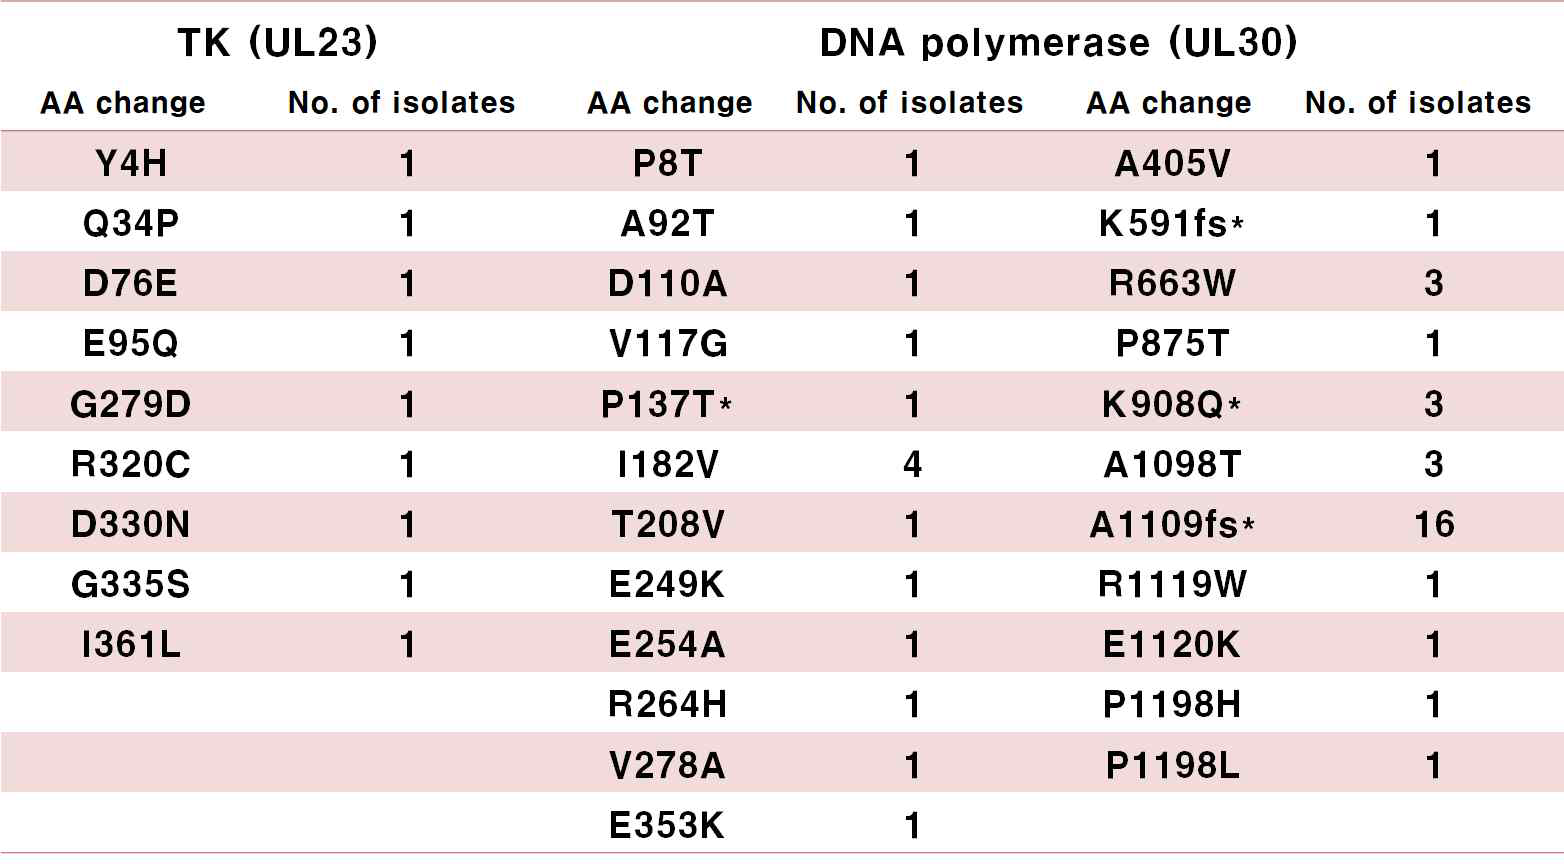 Polymorphisms of unclear significance within TK and pol genes identified 81 HSV-1 clinical isolates